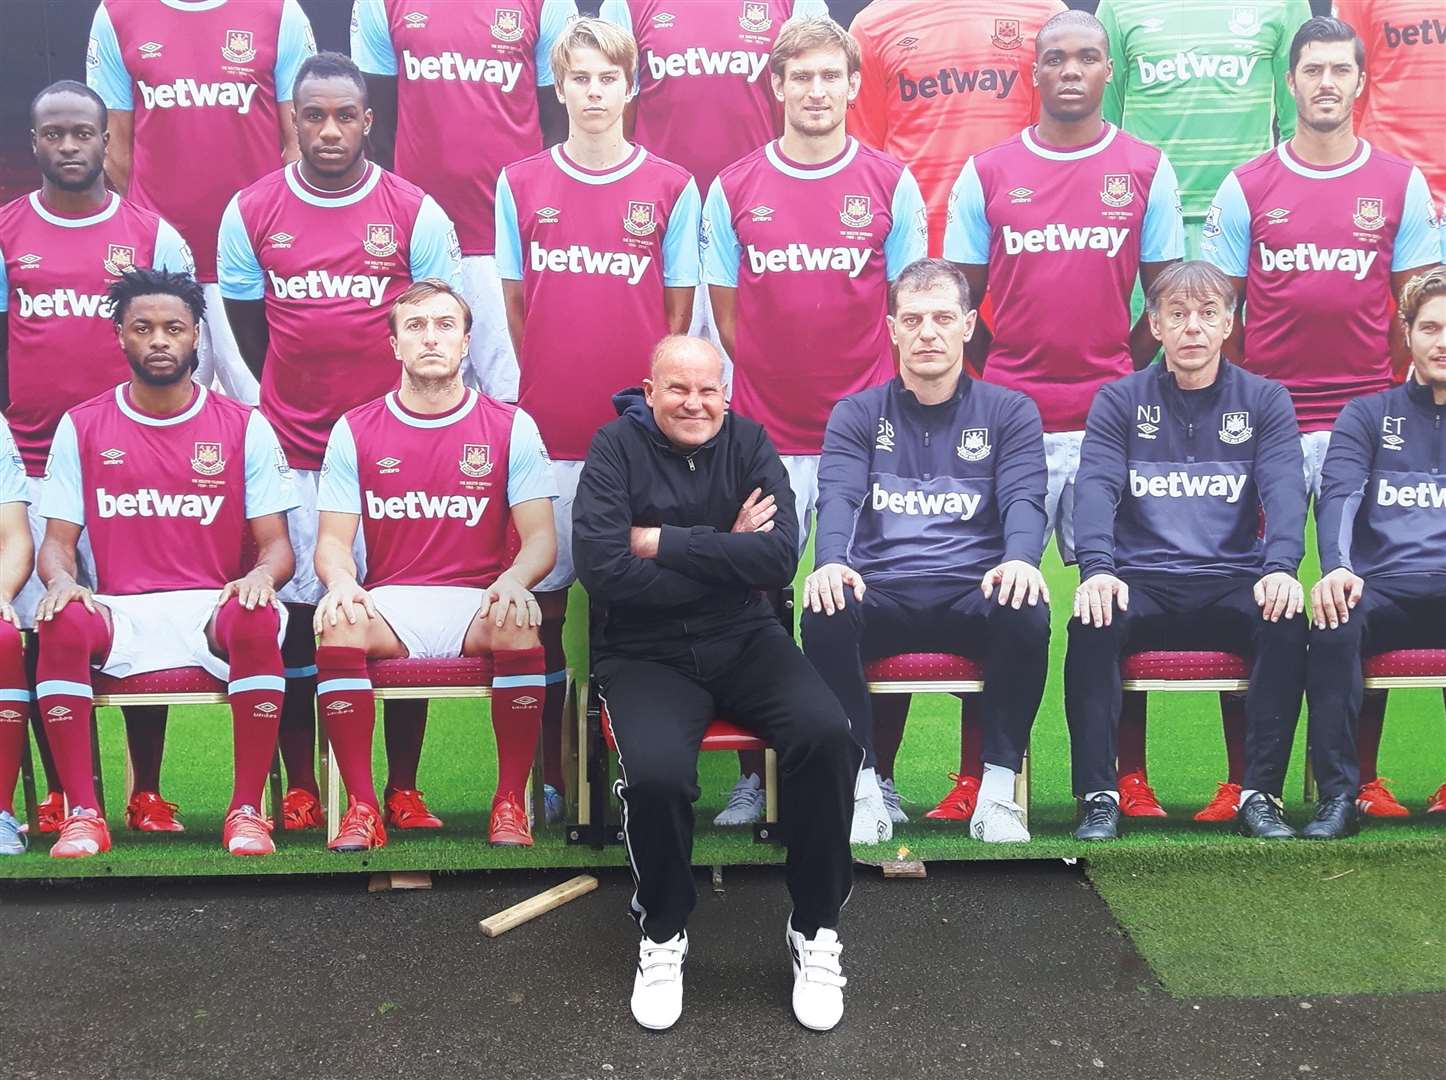 Robbie Manning poses with a picture of the 2015/16 West Ham squad